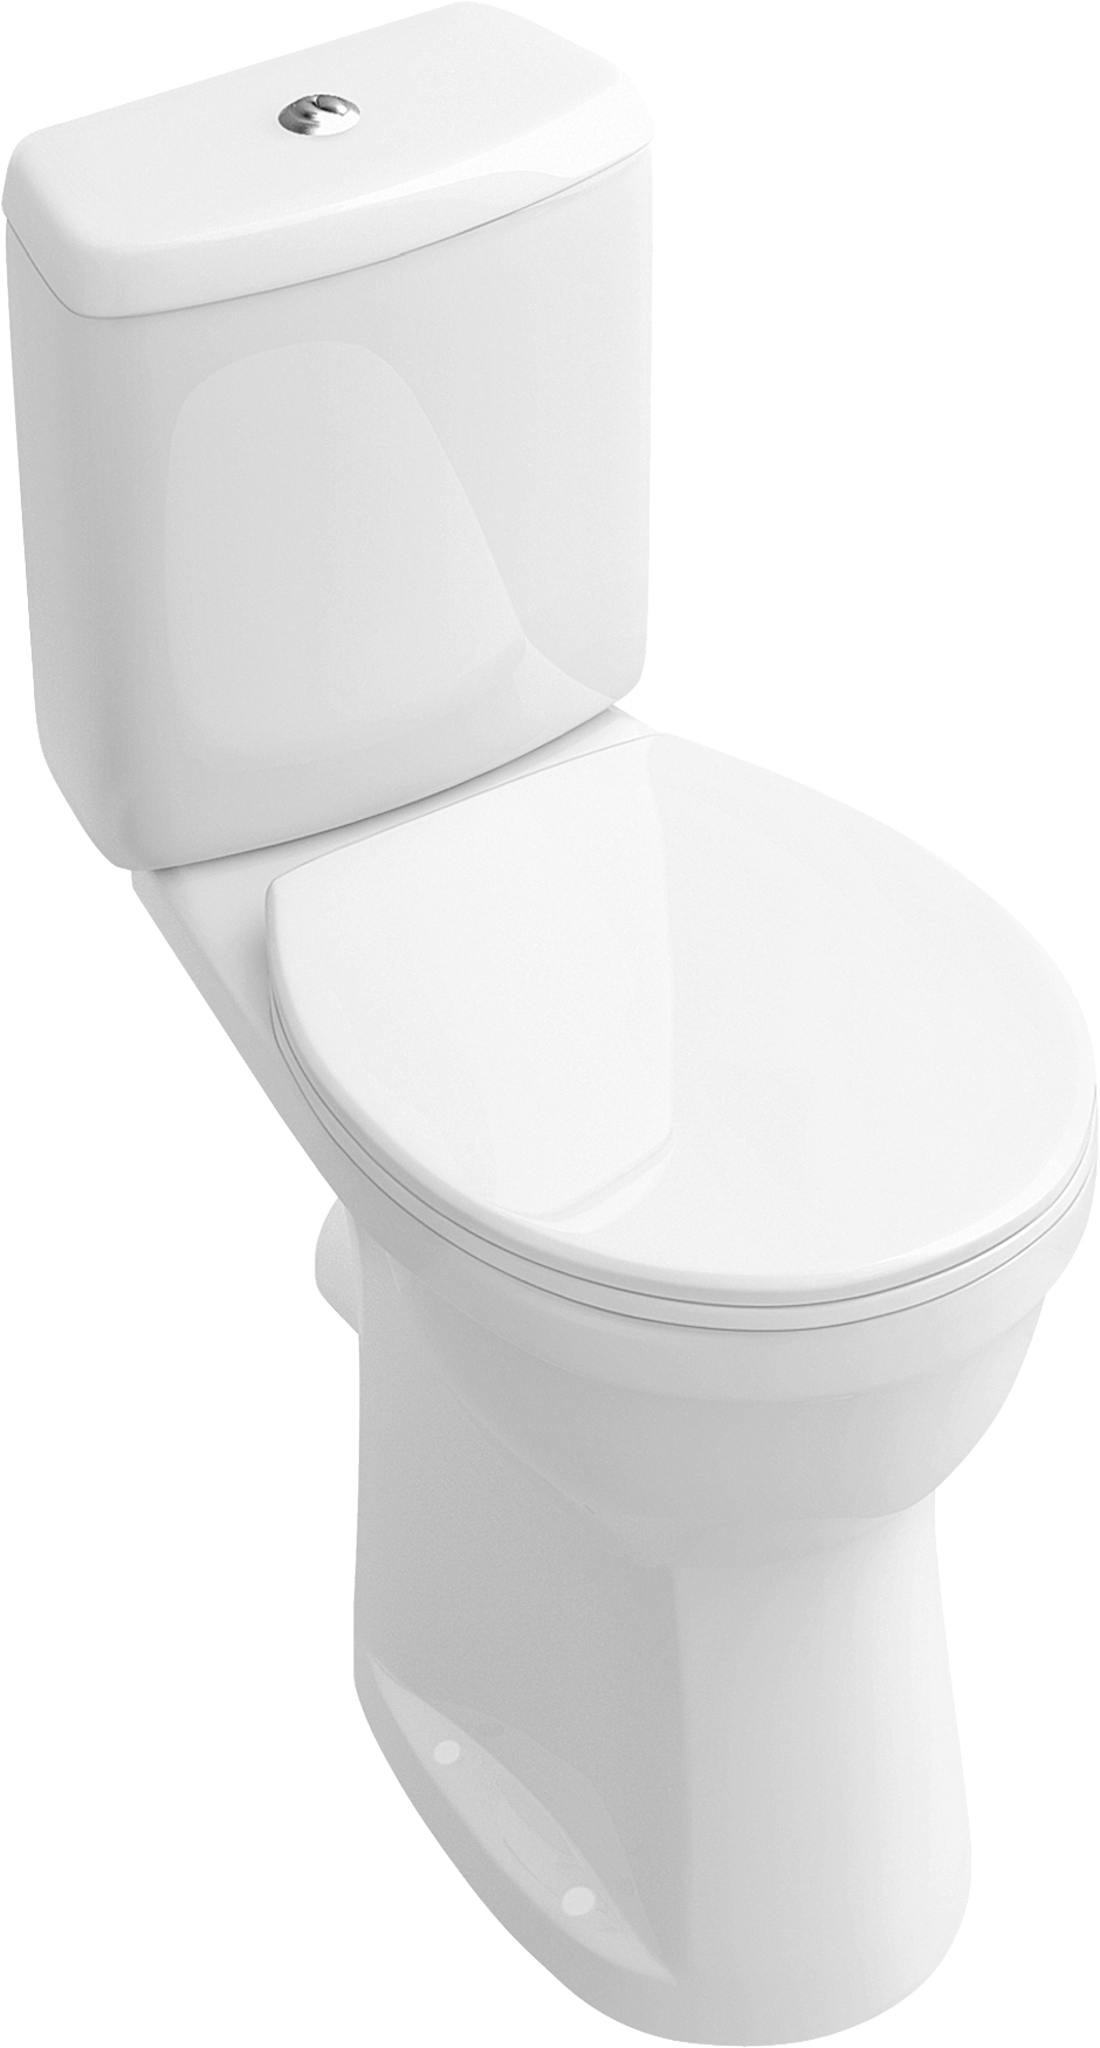 toilet png images are download crazypngm crazy png images download #29276